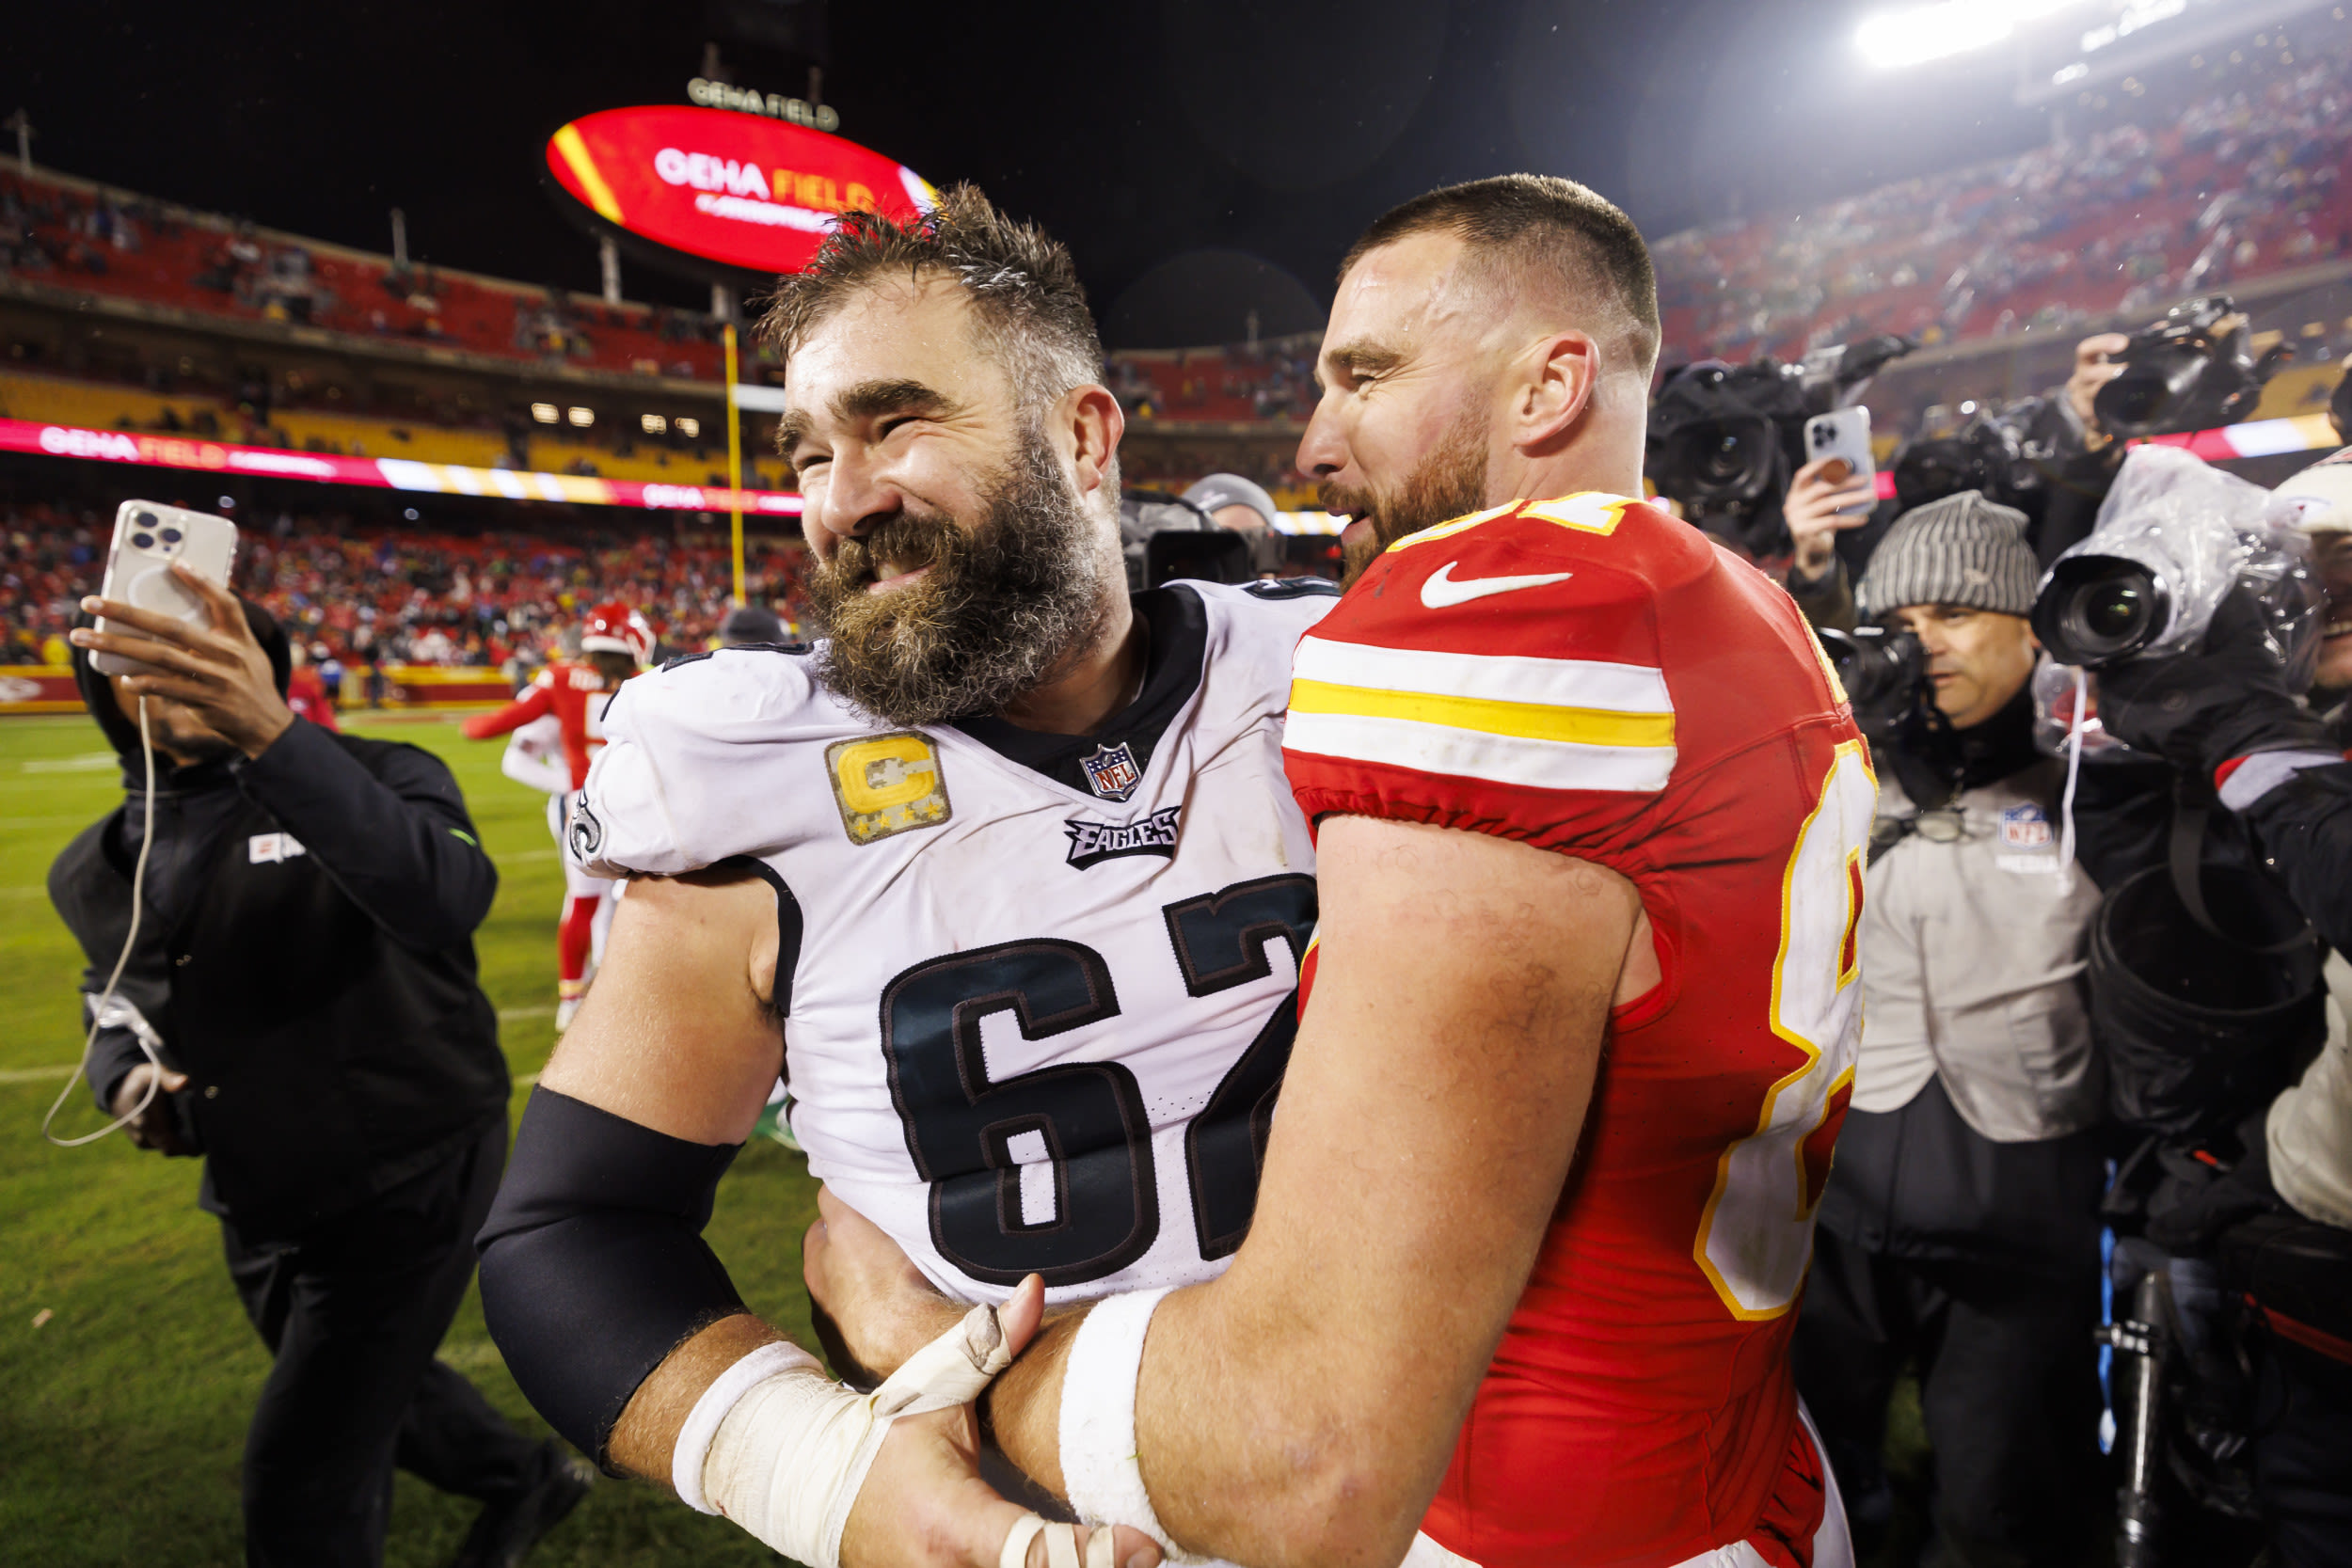 'Wheel of Fortune' celeb contestants had no idea who Kelce brothers were